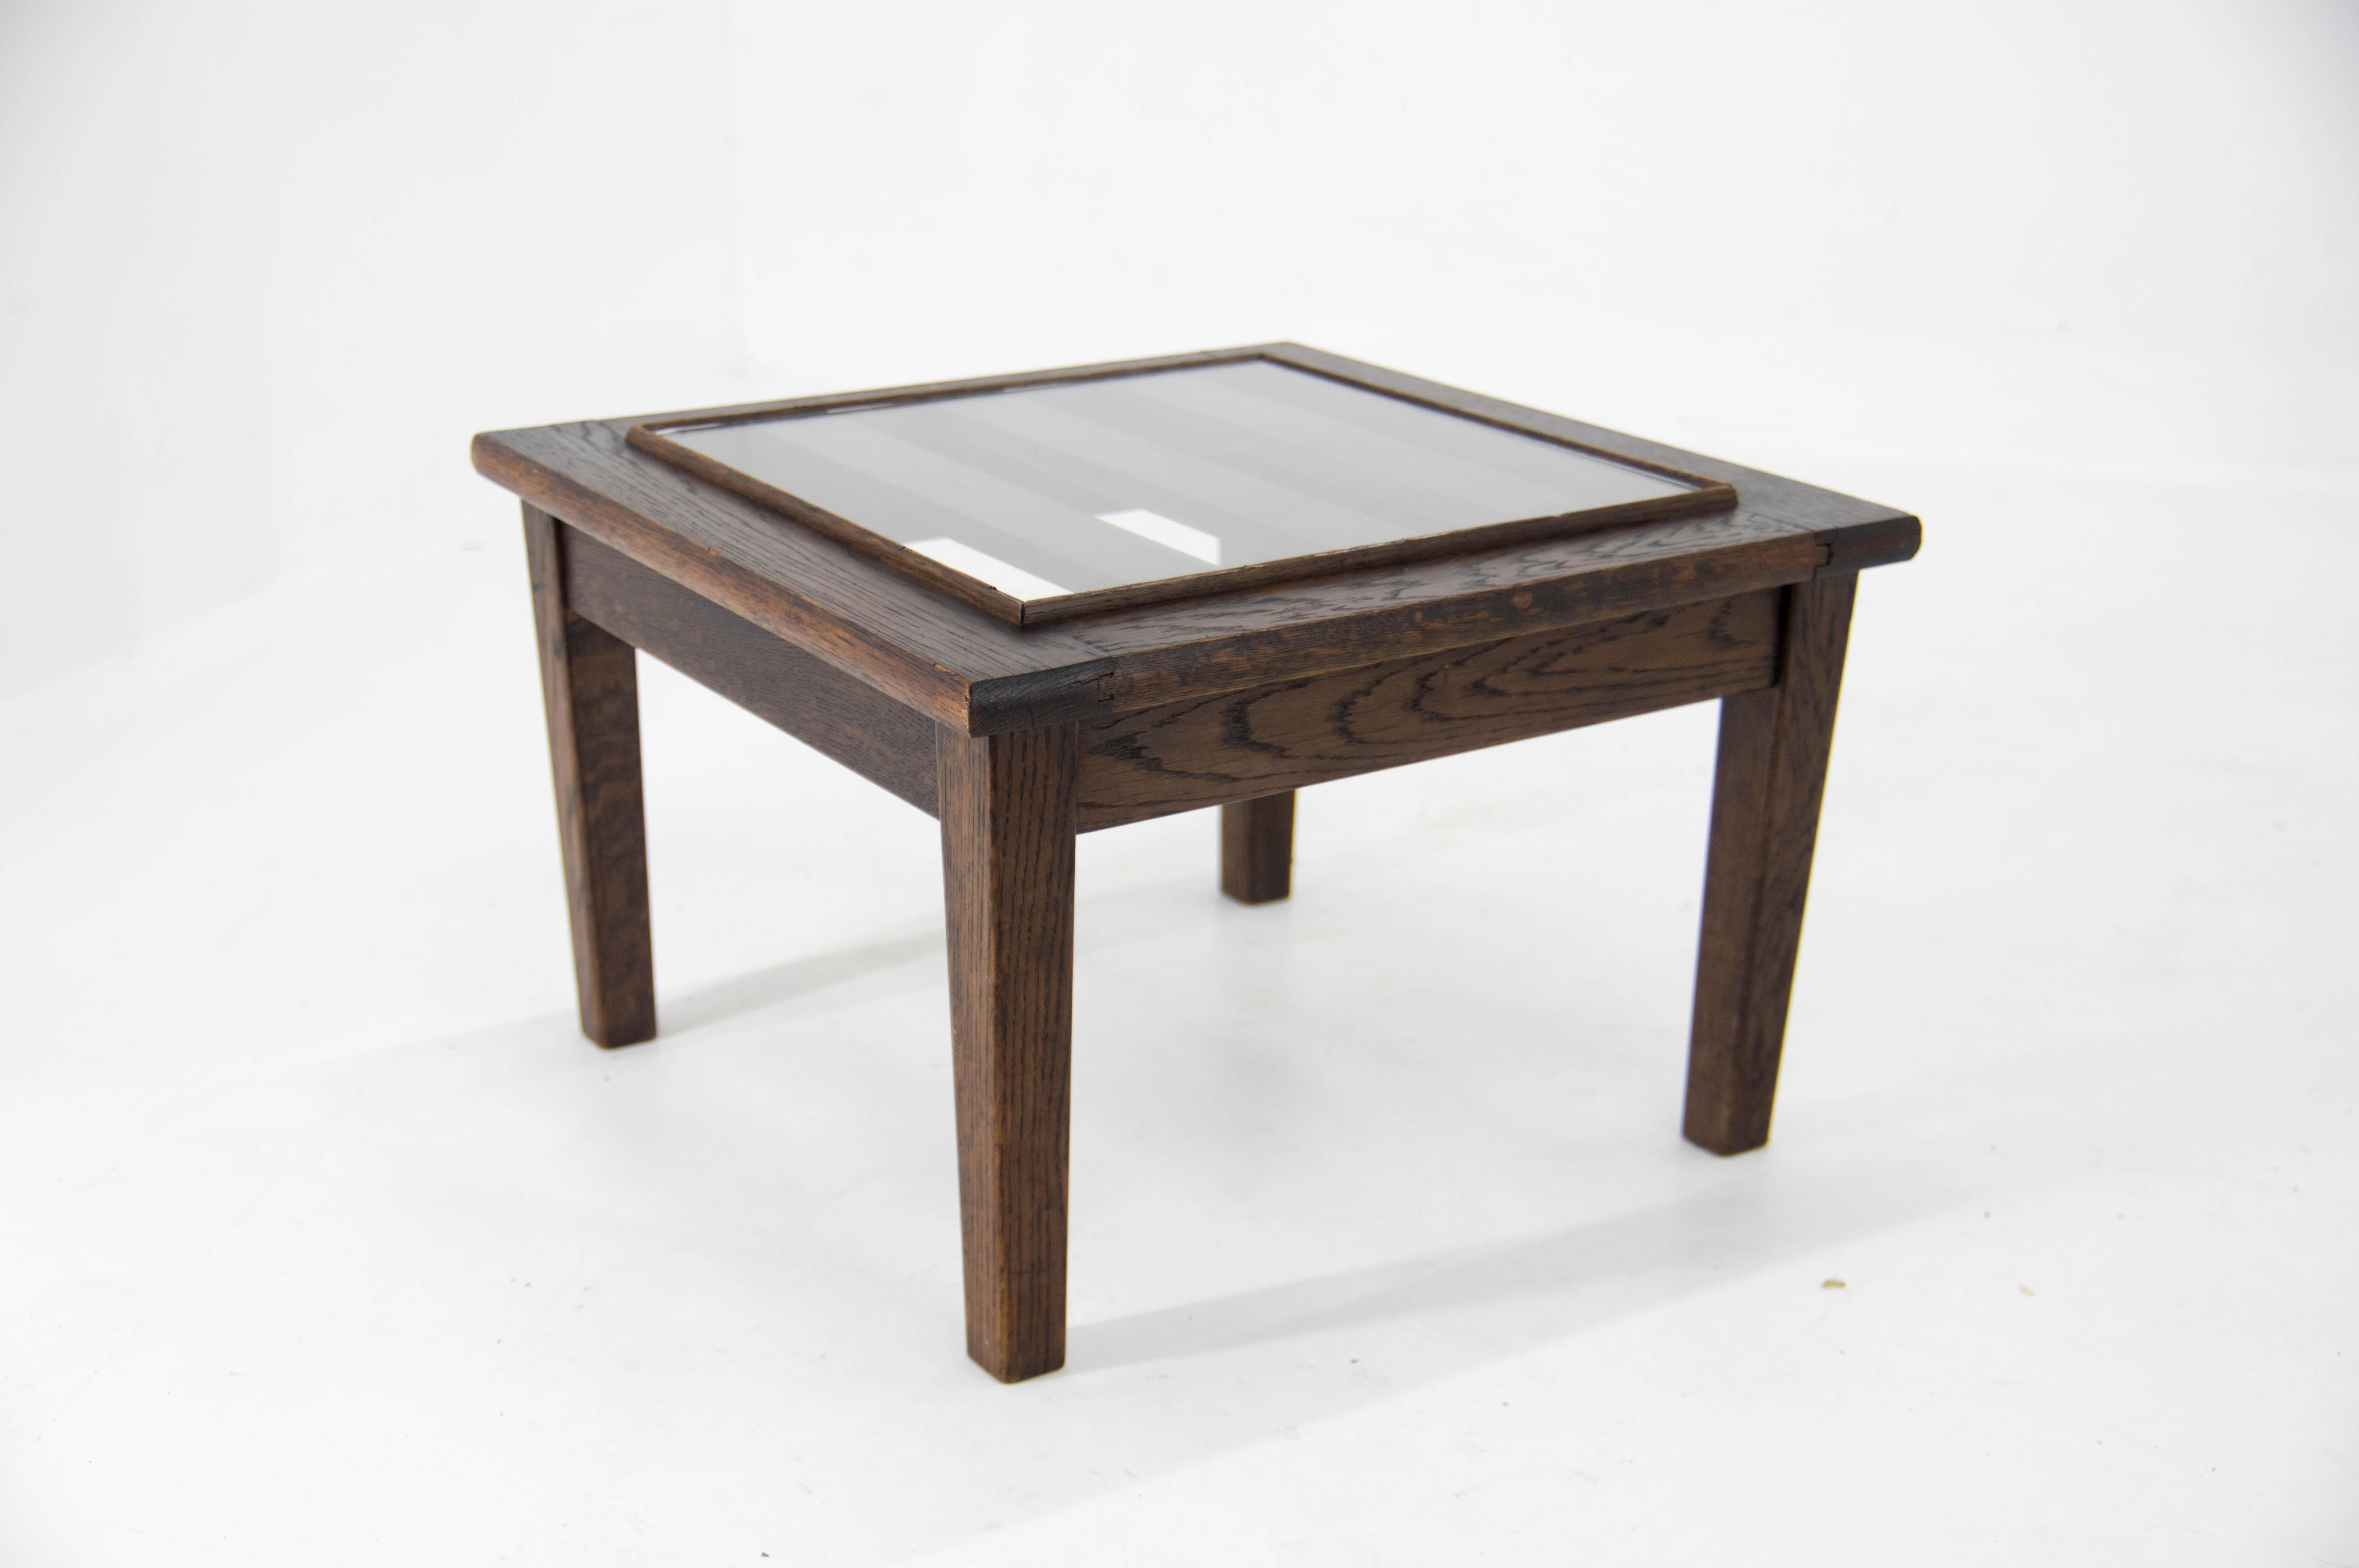 Czech Rare Functionalist Side Table by Antonin Heythum, 1930s For Sale